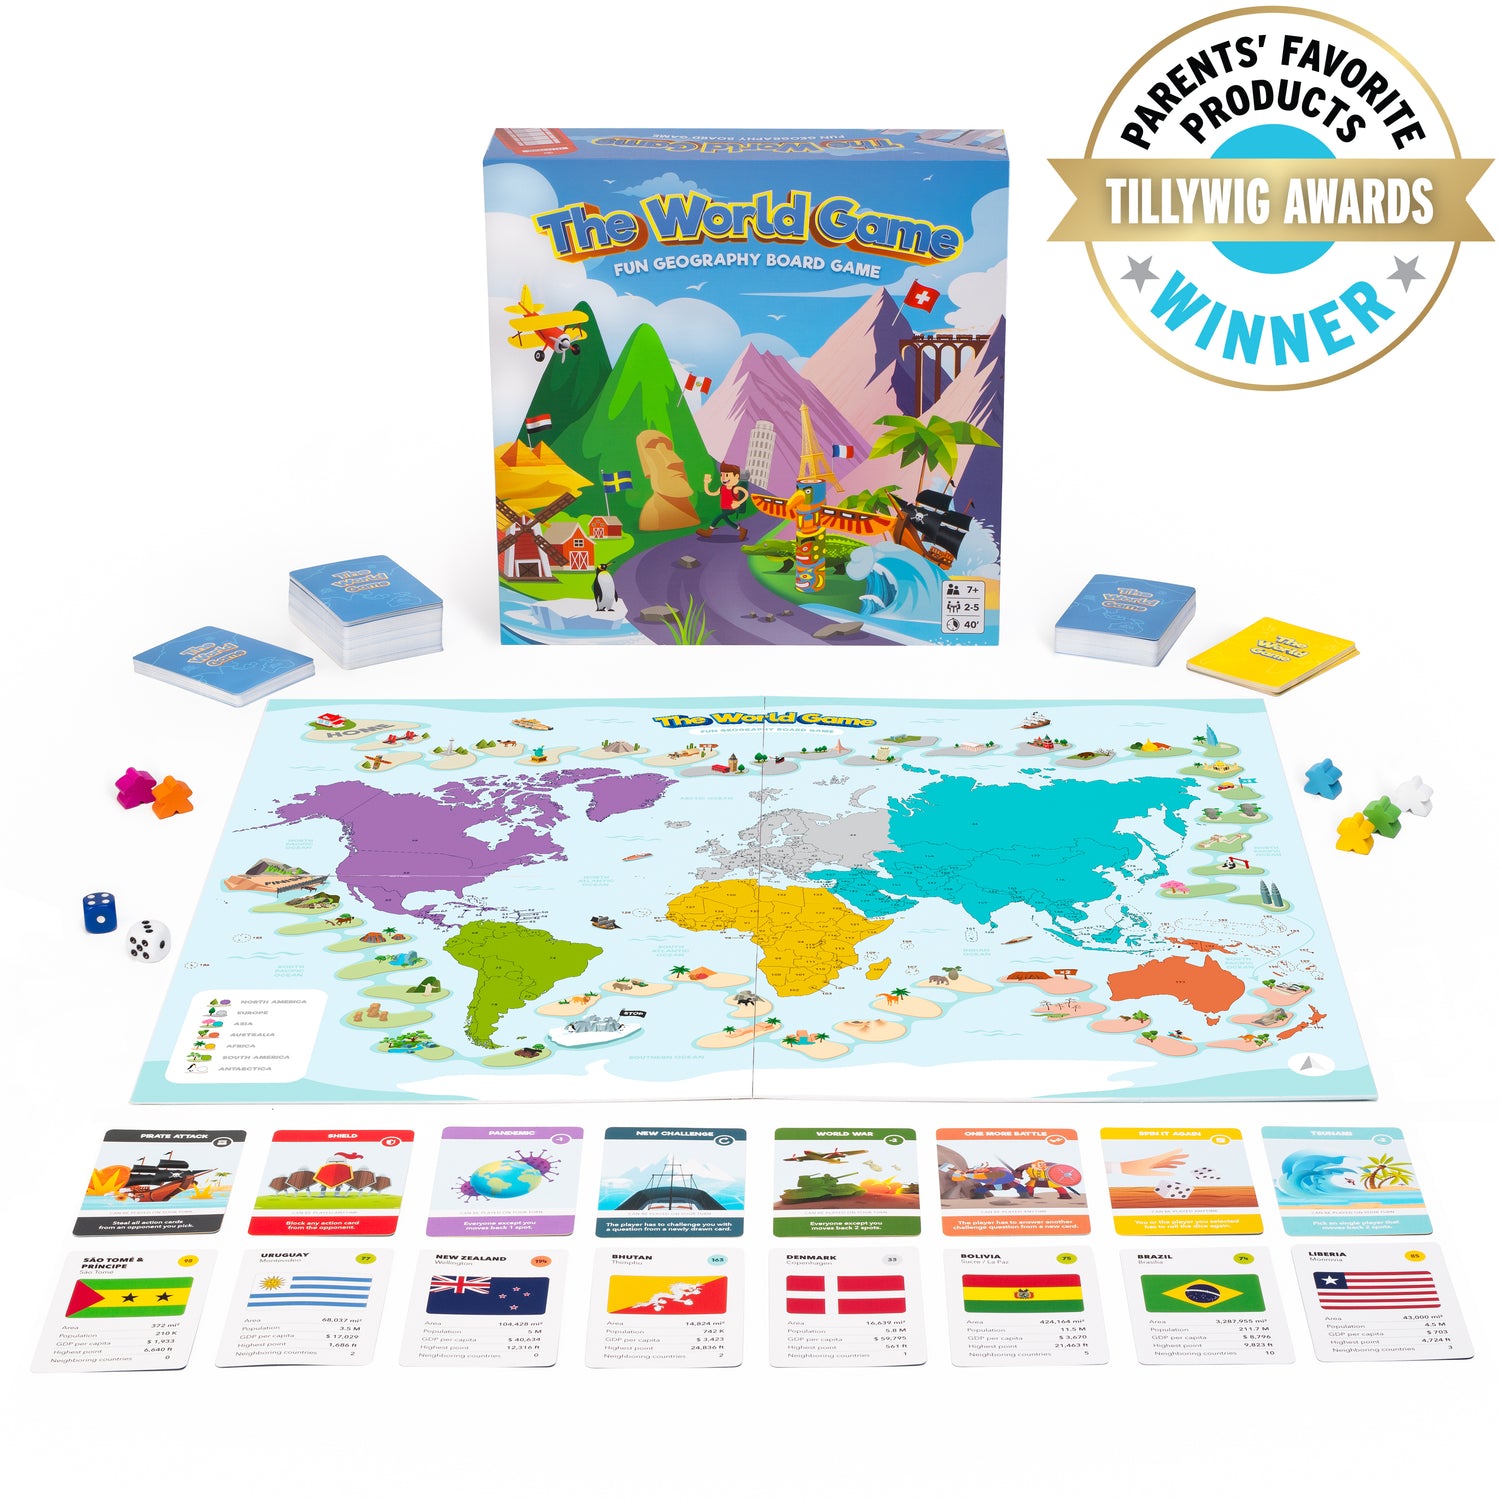 Fun educational board game that you can also play as an adult and discuss history while playing.